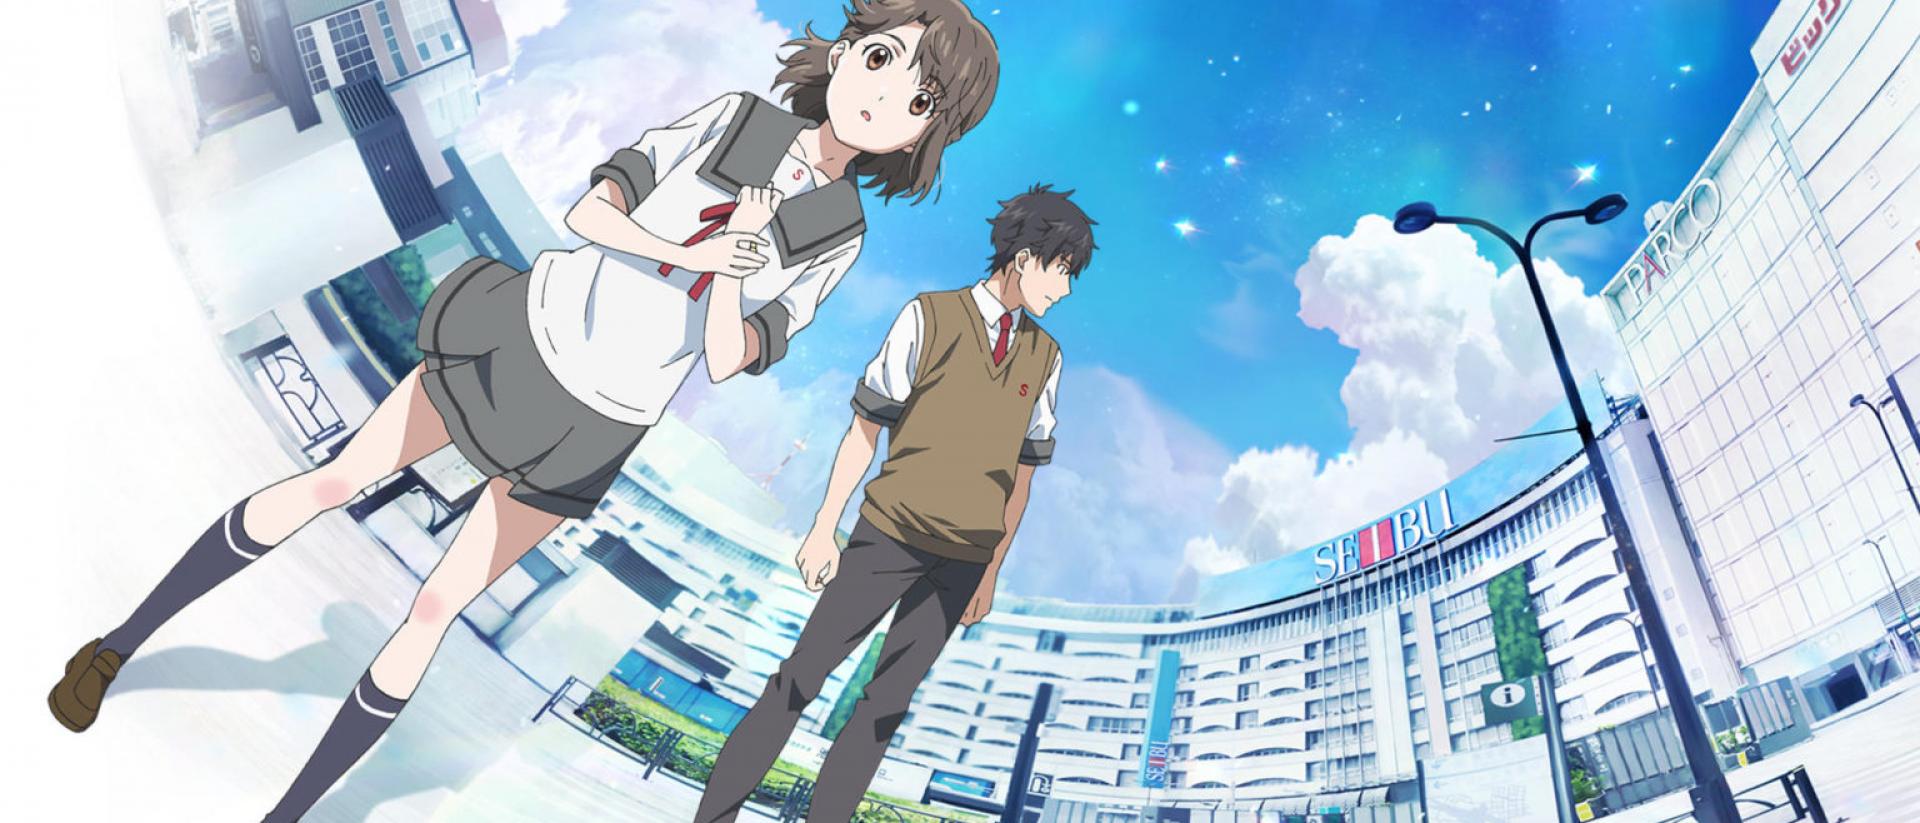 still from animated film over the sky featuring two people standing in a curved line of white buildings under a blue sky